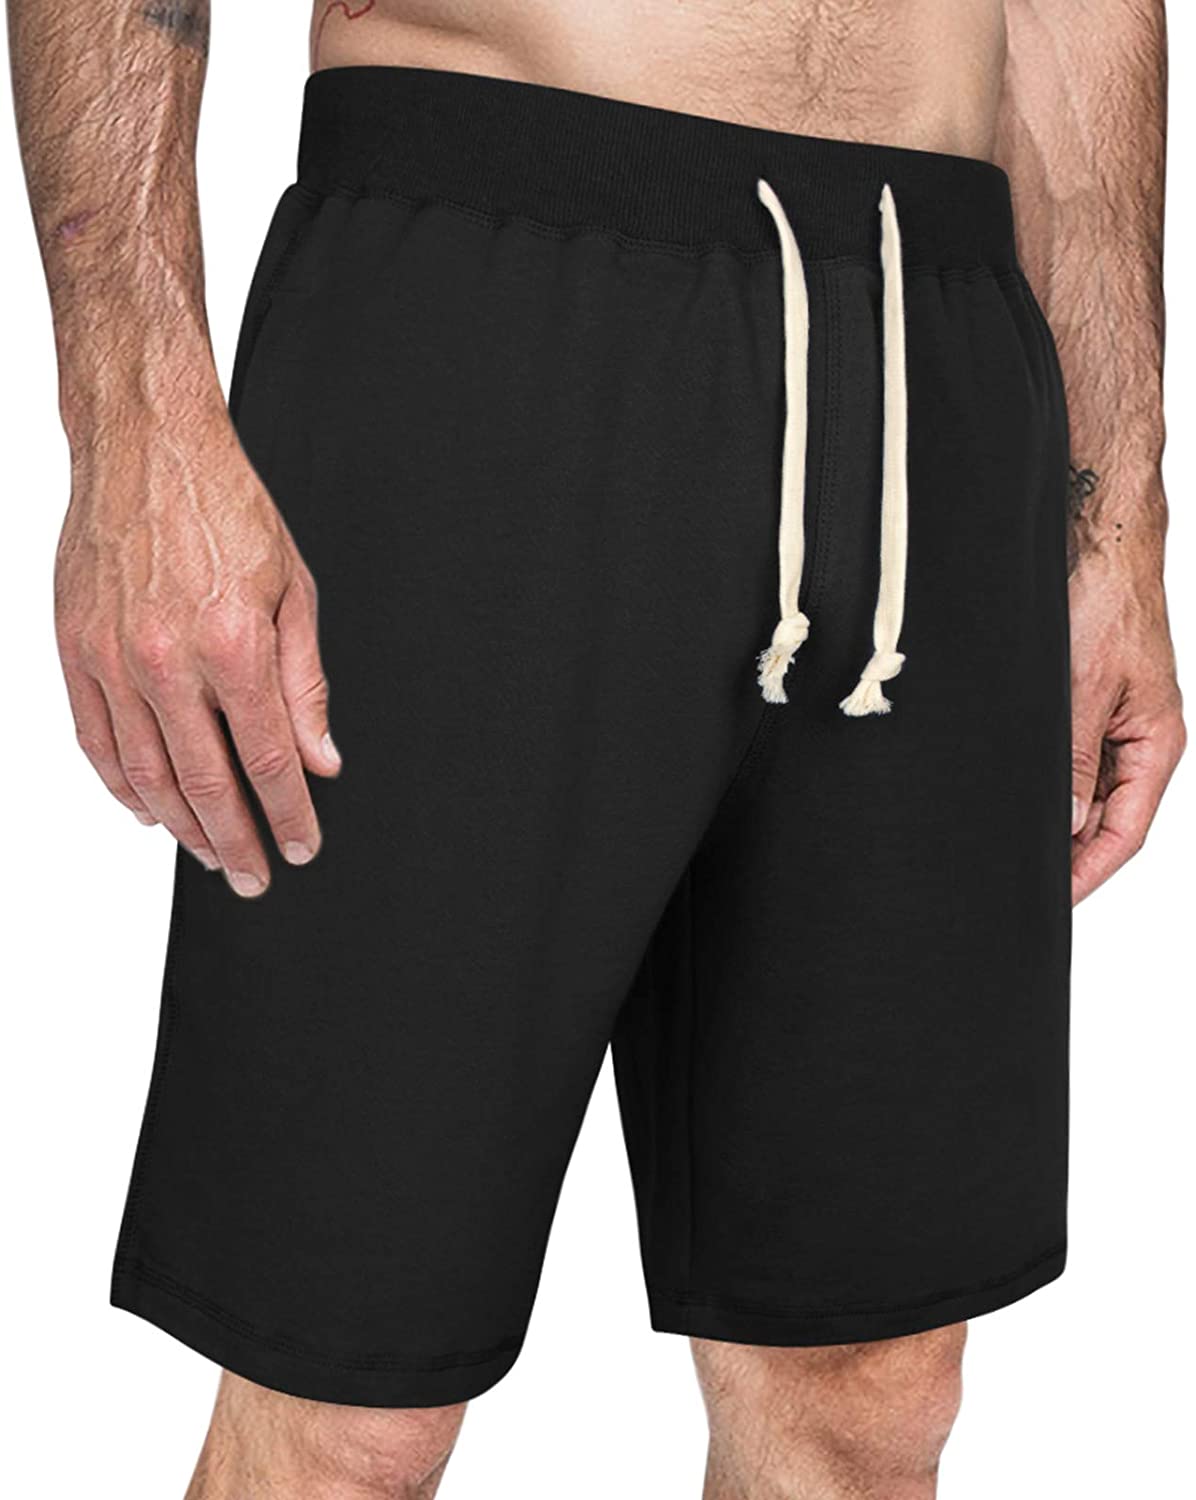 Lounge Shorts with Pockets ThEast Mens Casual Cotton Athletic Shorts 